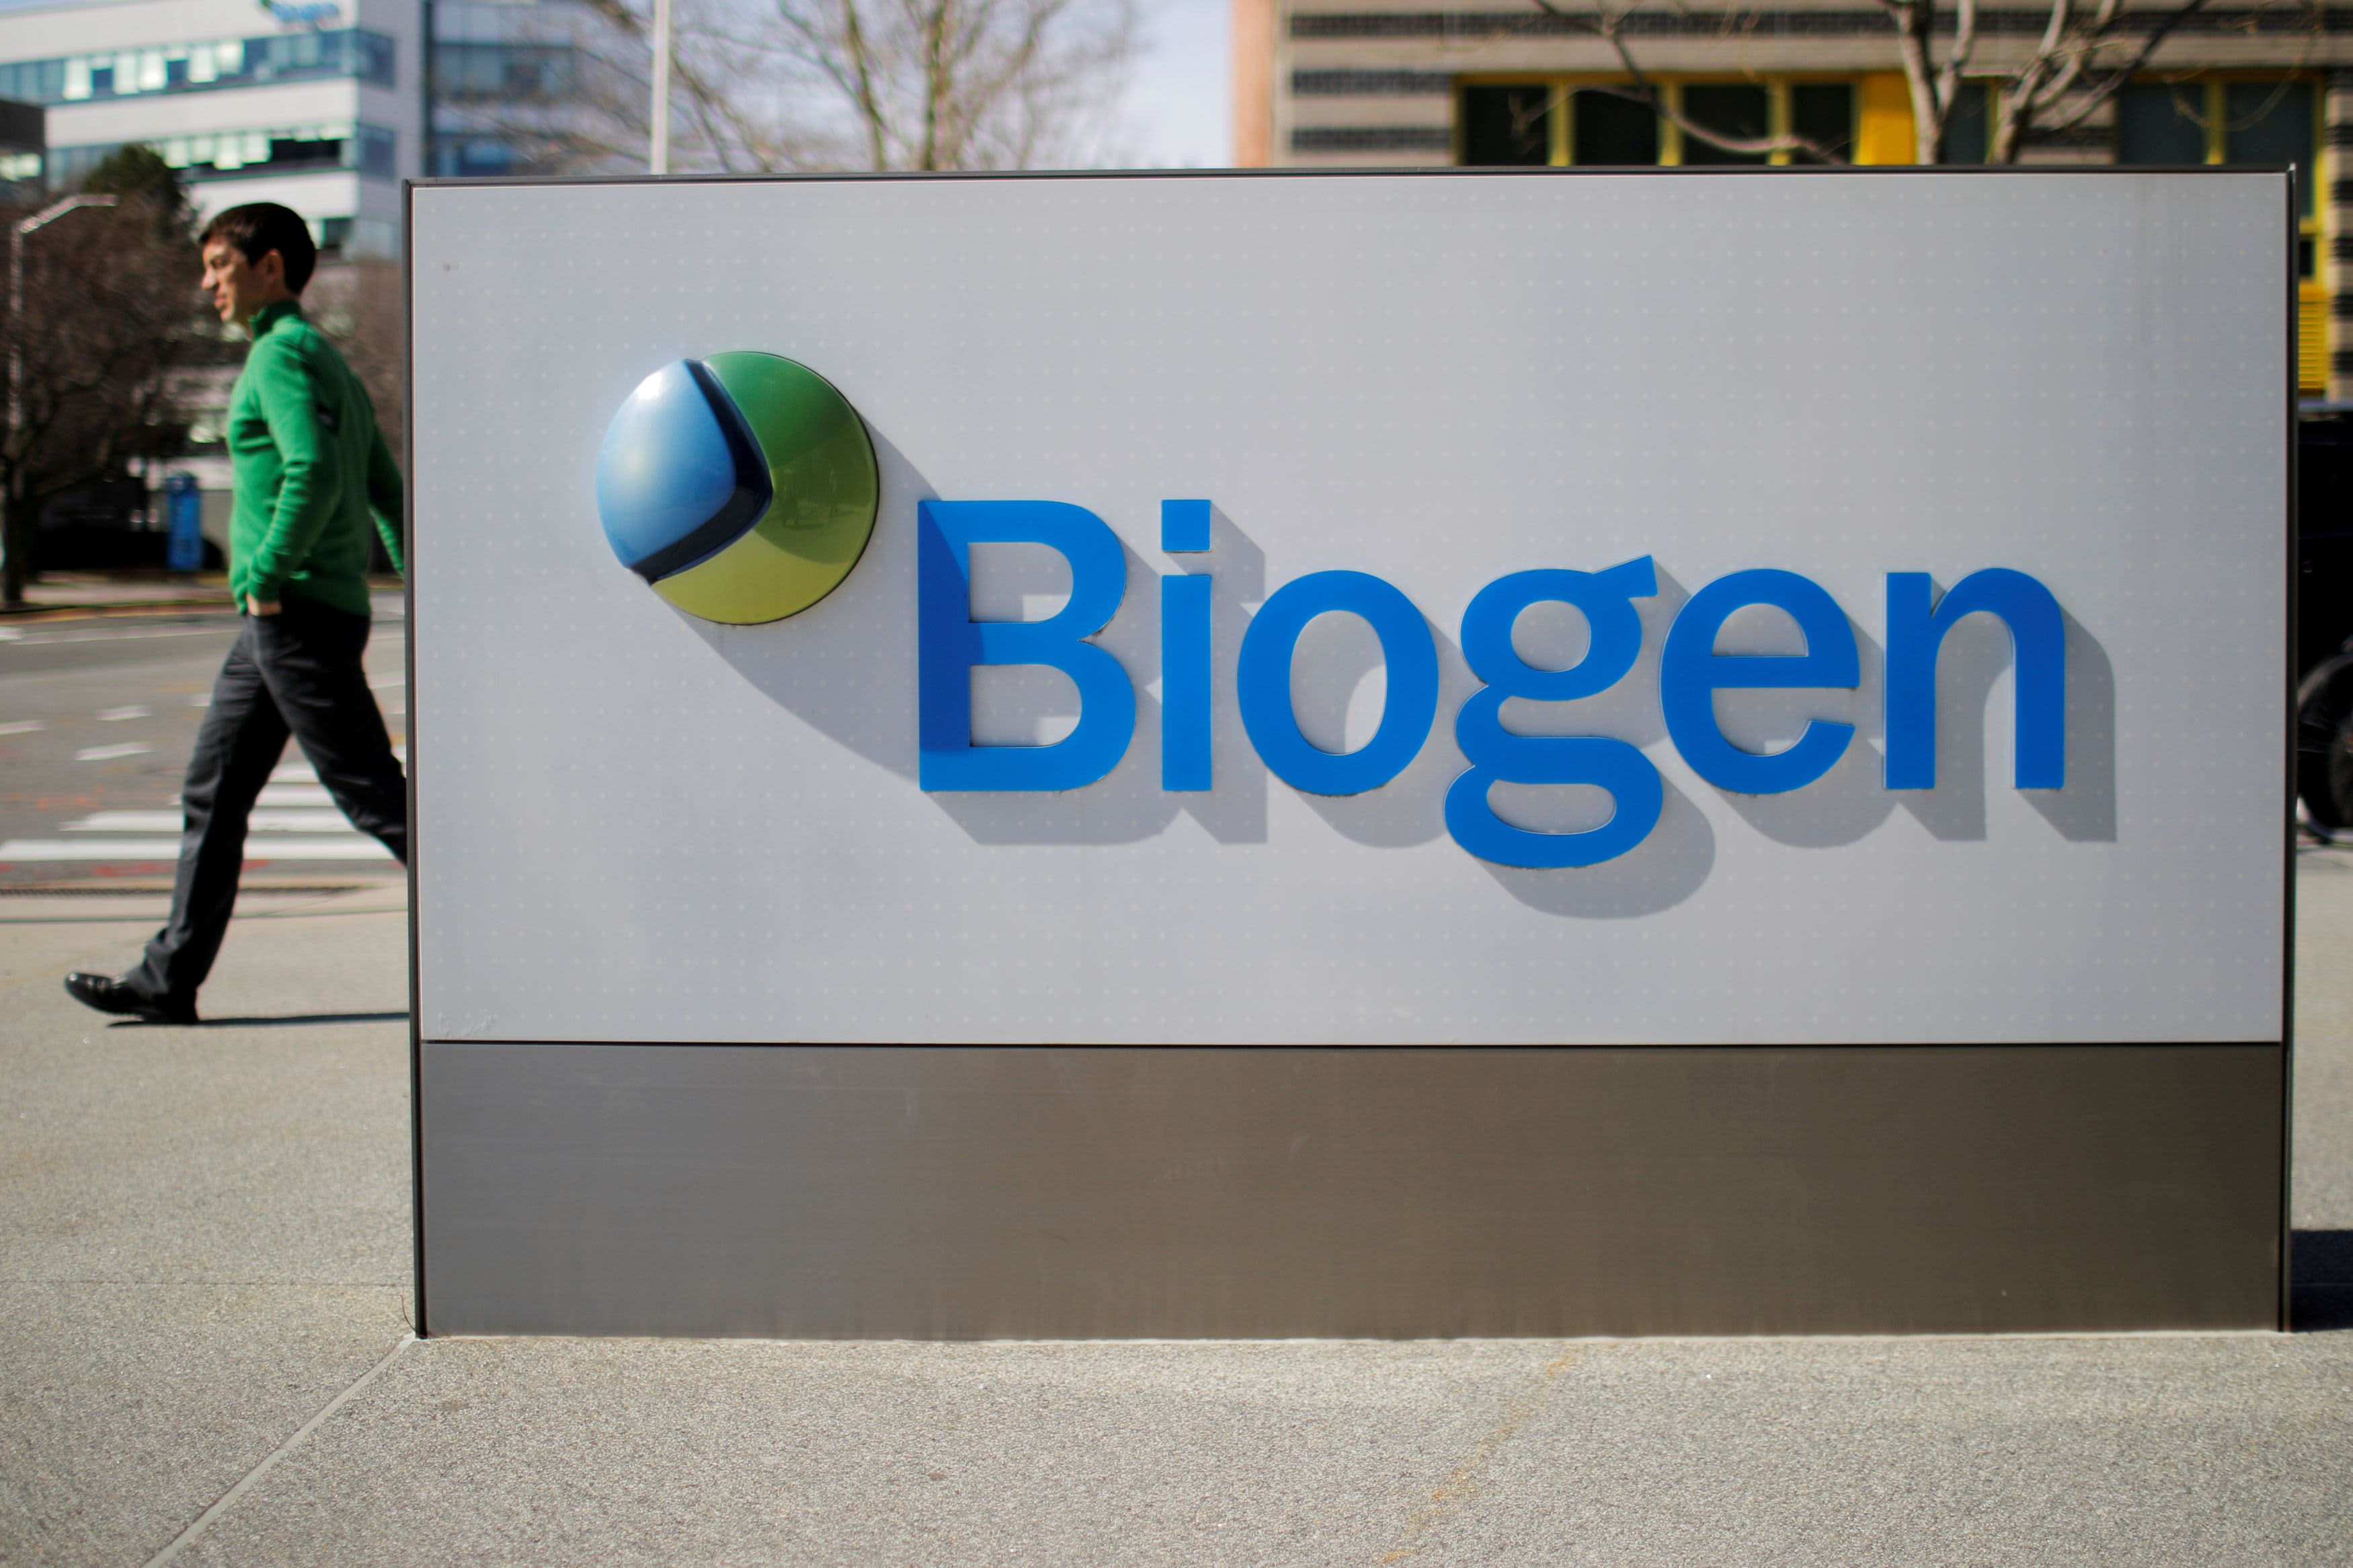 Dementia expert says evidence behind Biogen Alzheimer's drug 'wasn’t sufficient' for FDA approval